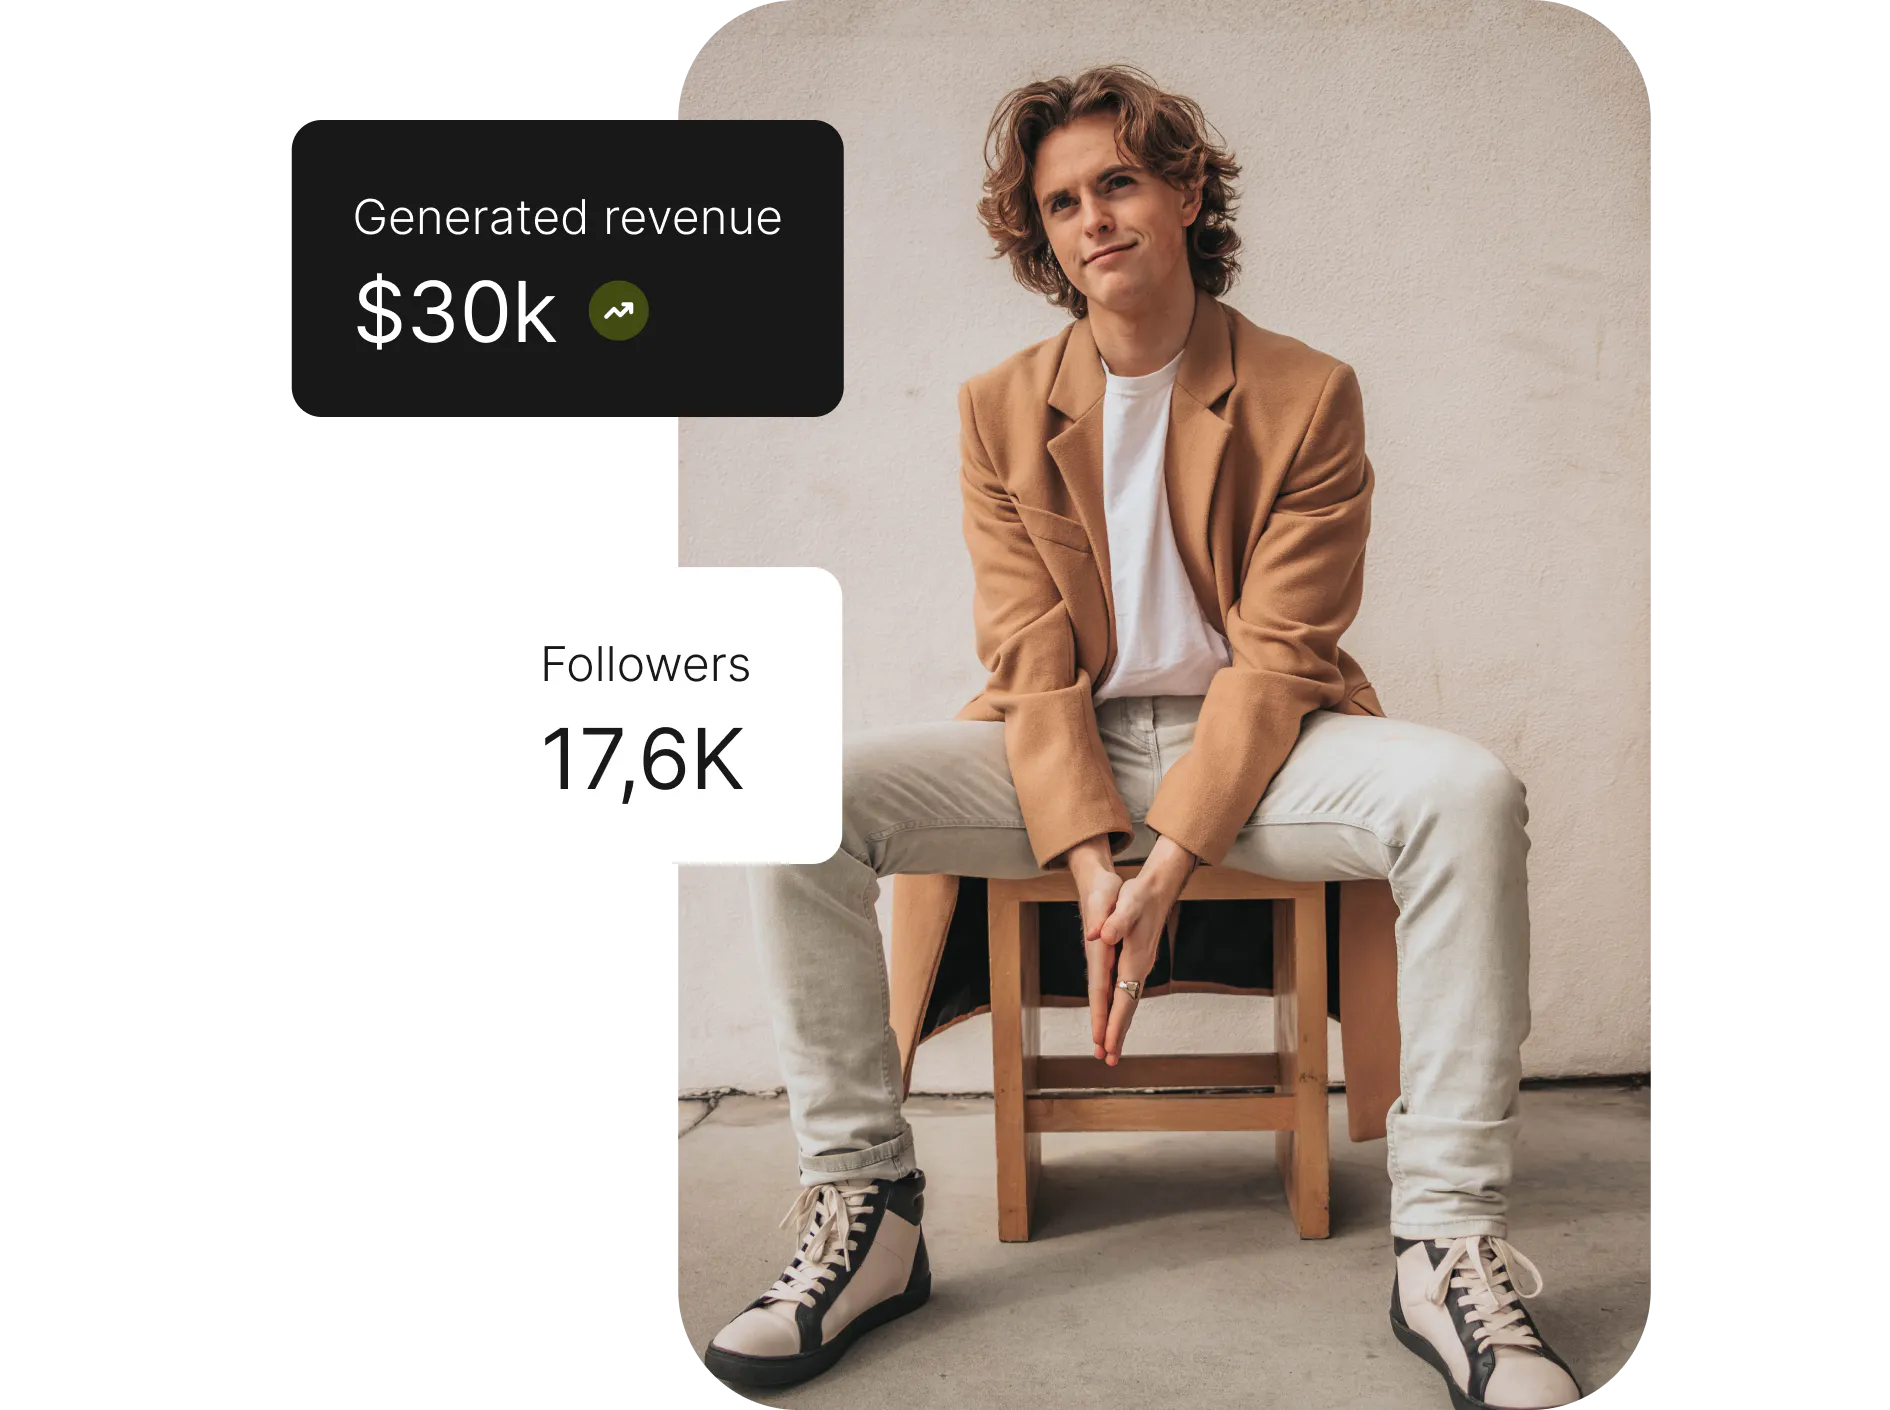 Picture of a sitting man with generated revenue data and followers count